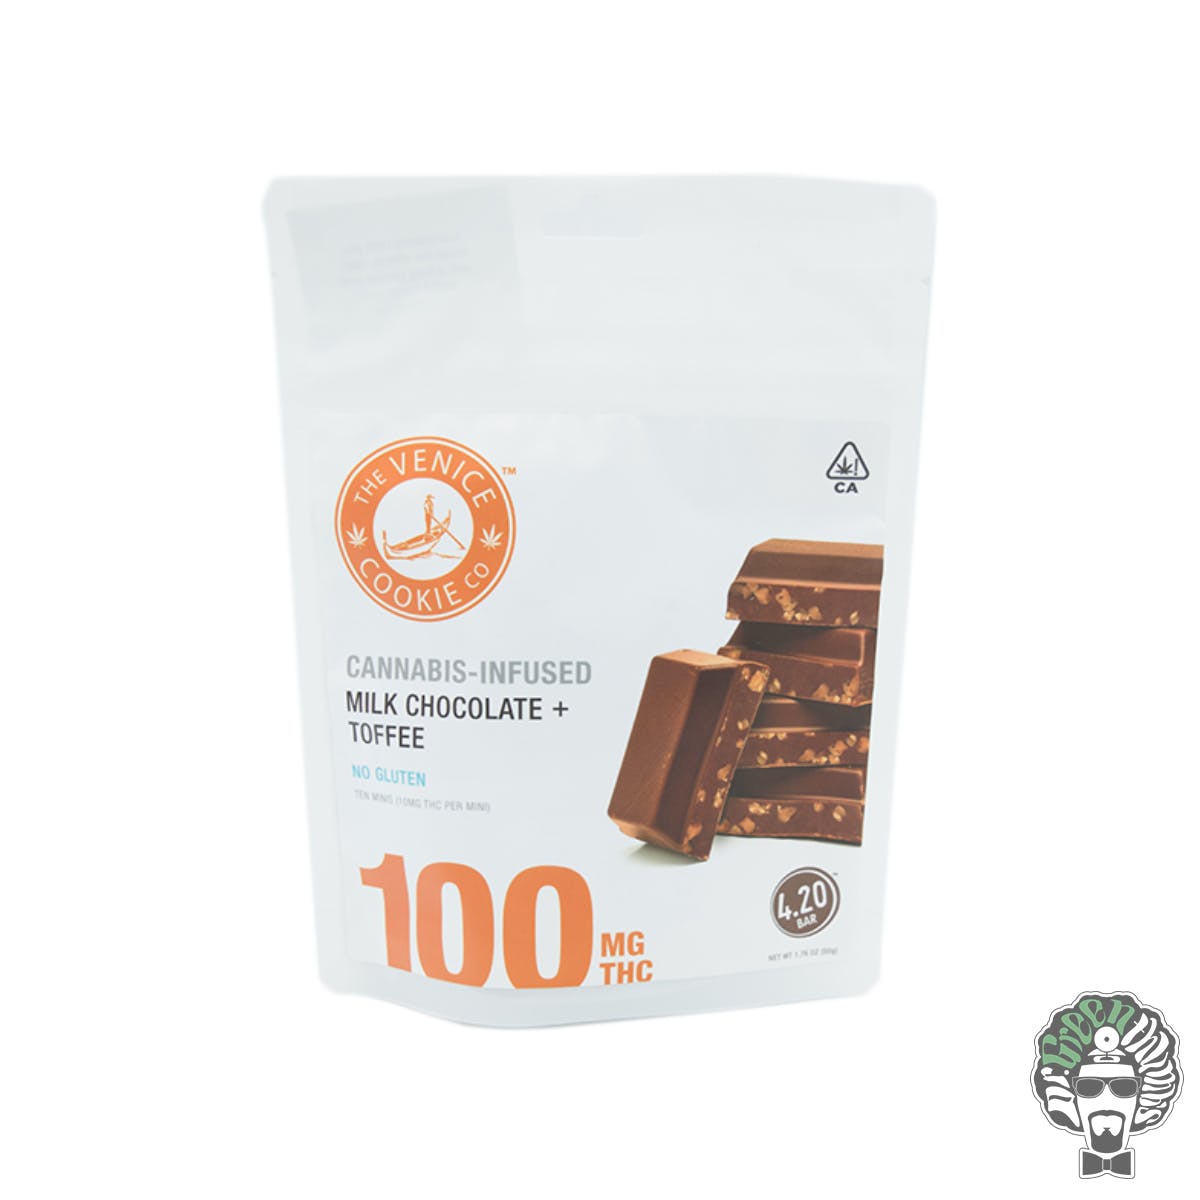 edible-the-venice-cookie-co-milk-chocolate-2b-toffy